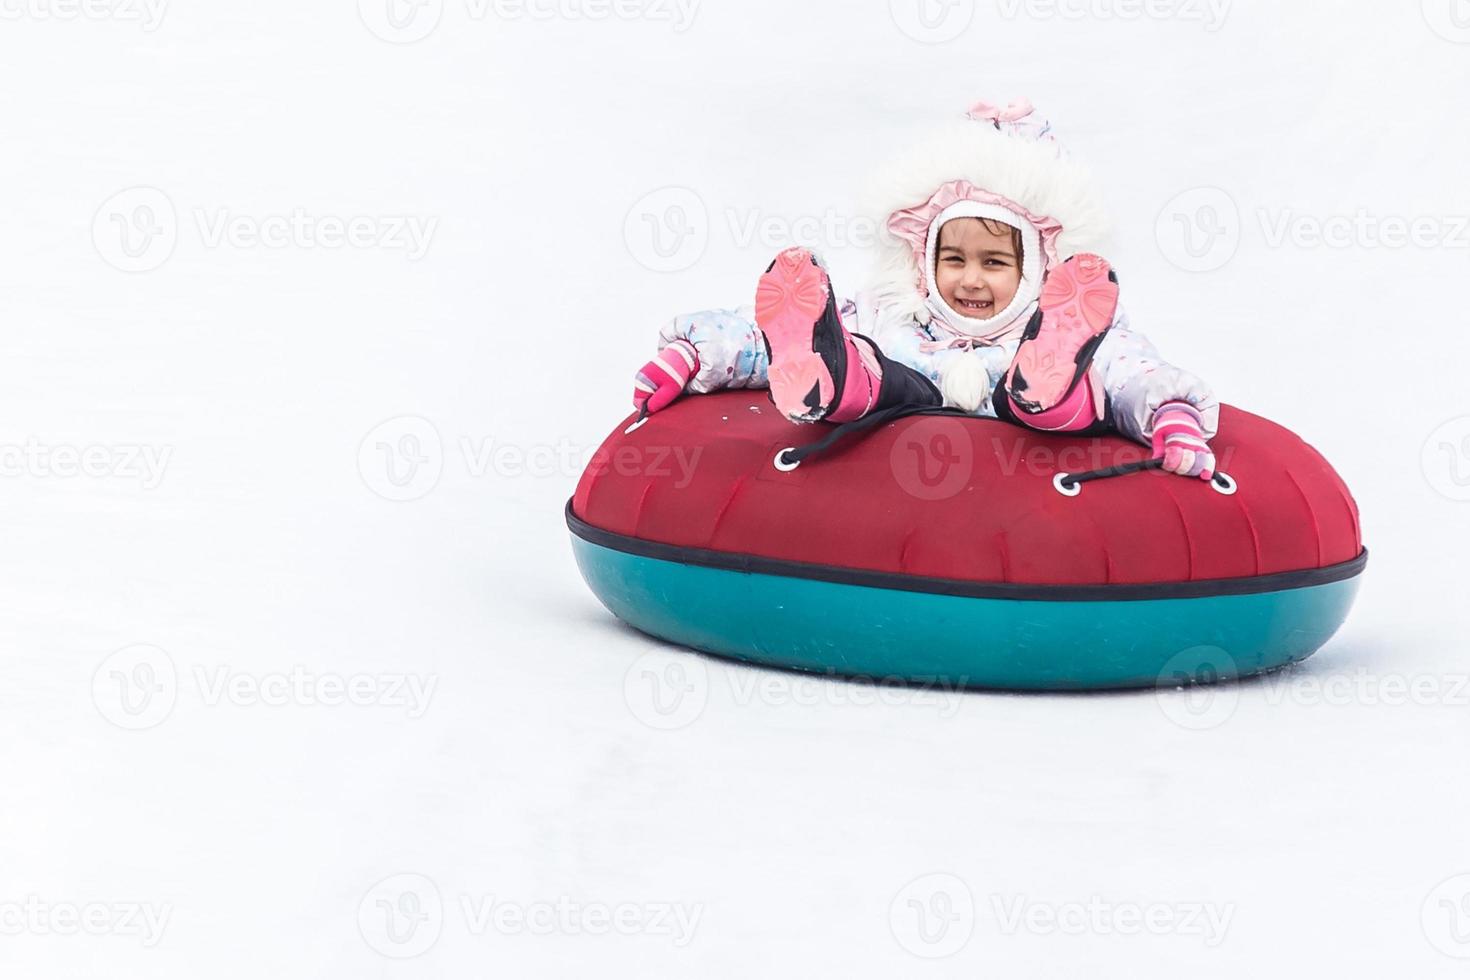 Little girl with snowtube ready for sledding down a hill photo